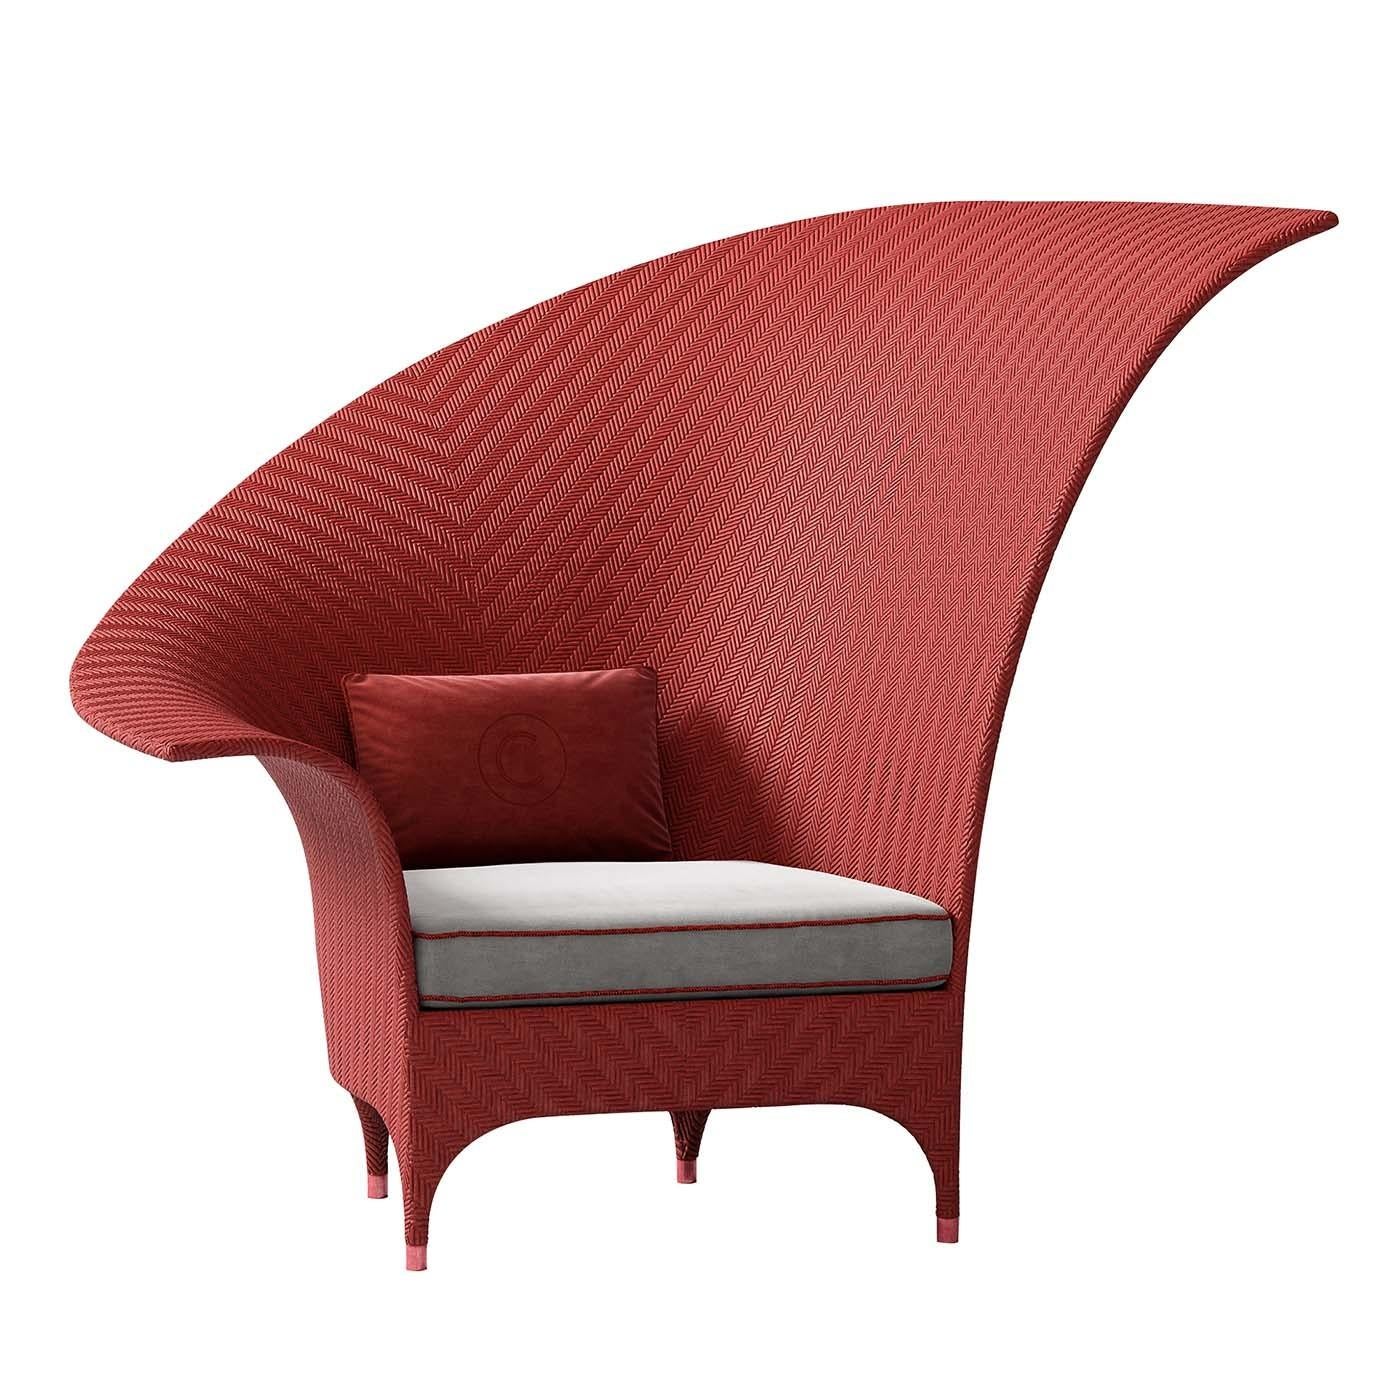 A true work of art, whose singularity lies in the balance of its proportions, this superb armchair's architectural silhouette evokes the sail of a boat. A statement piece on a terrace, patio, or poolside, the red resin-covered aluminum frame has